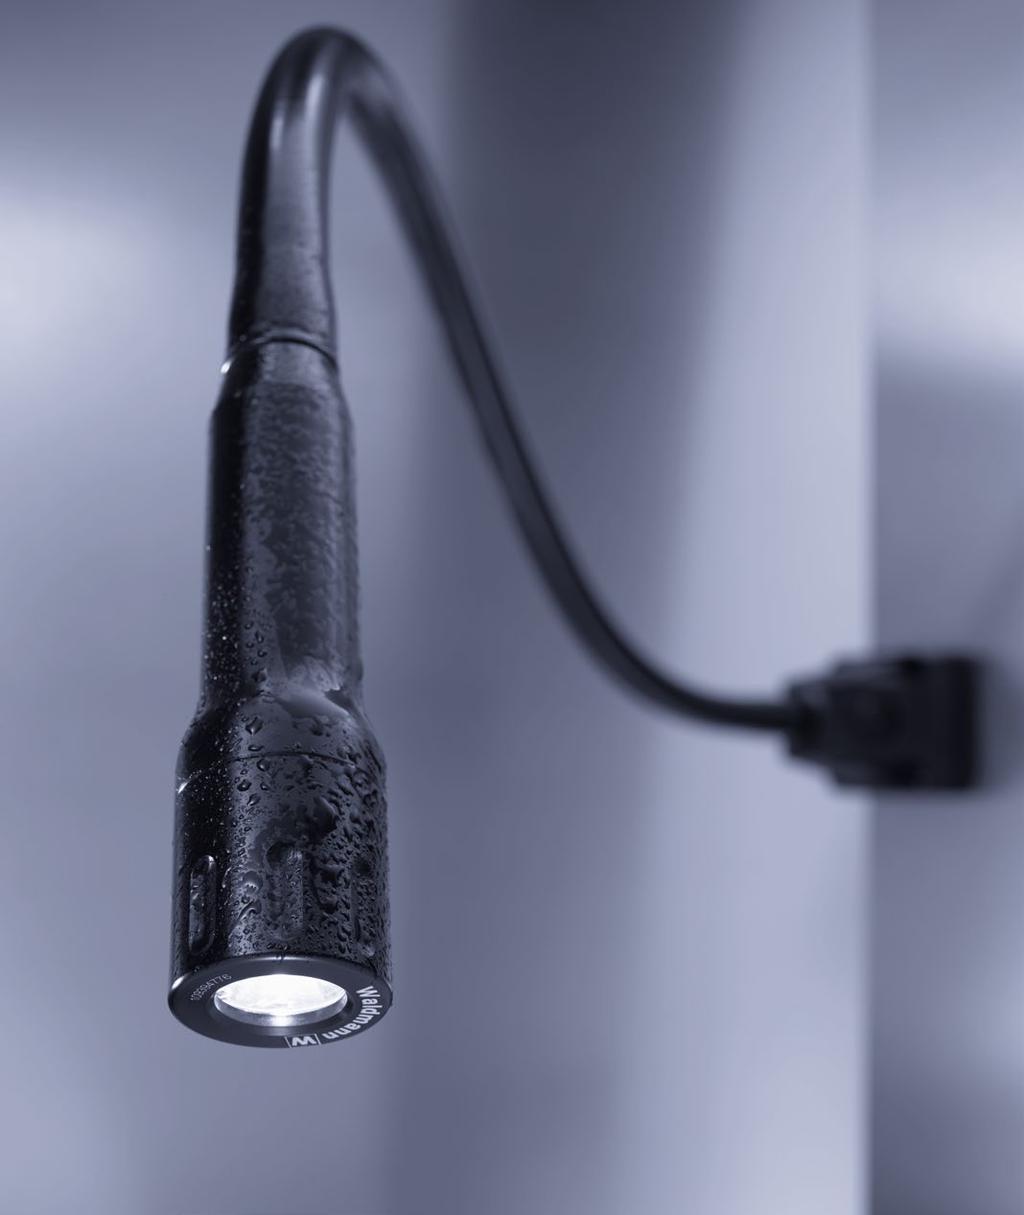 132 ABL The flexible head for tough tasks With its minimalist design, the ABL is as small and handy as a mini flashlight that can be fixed in any position.